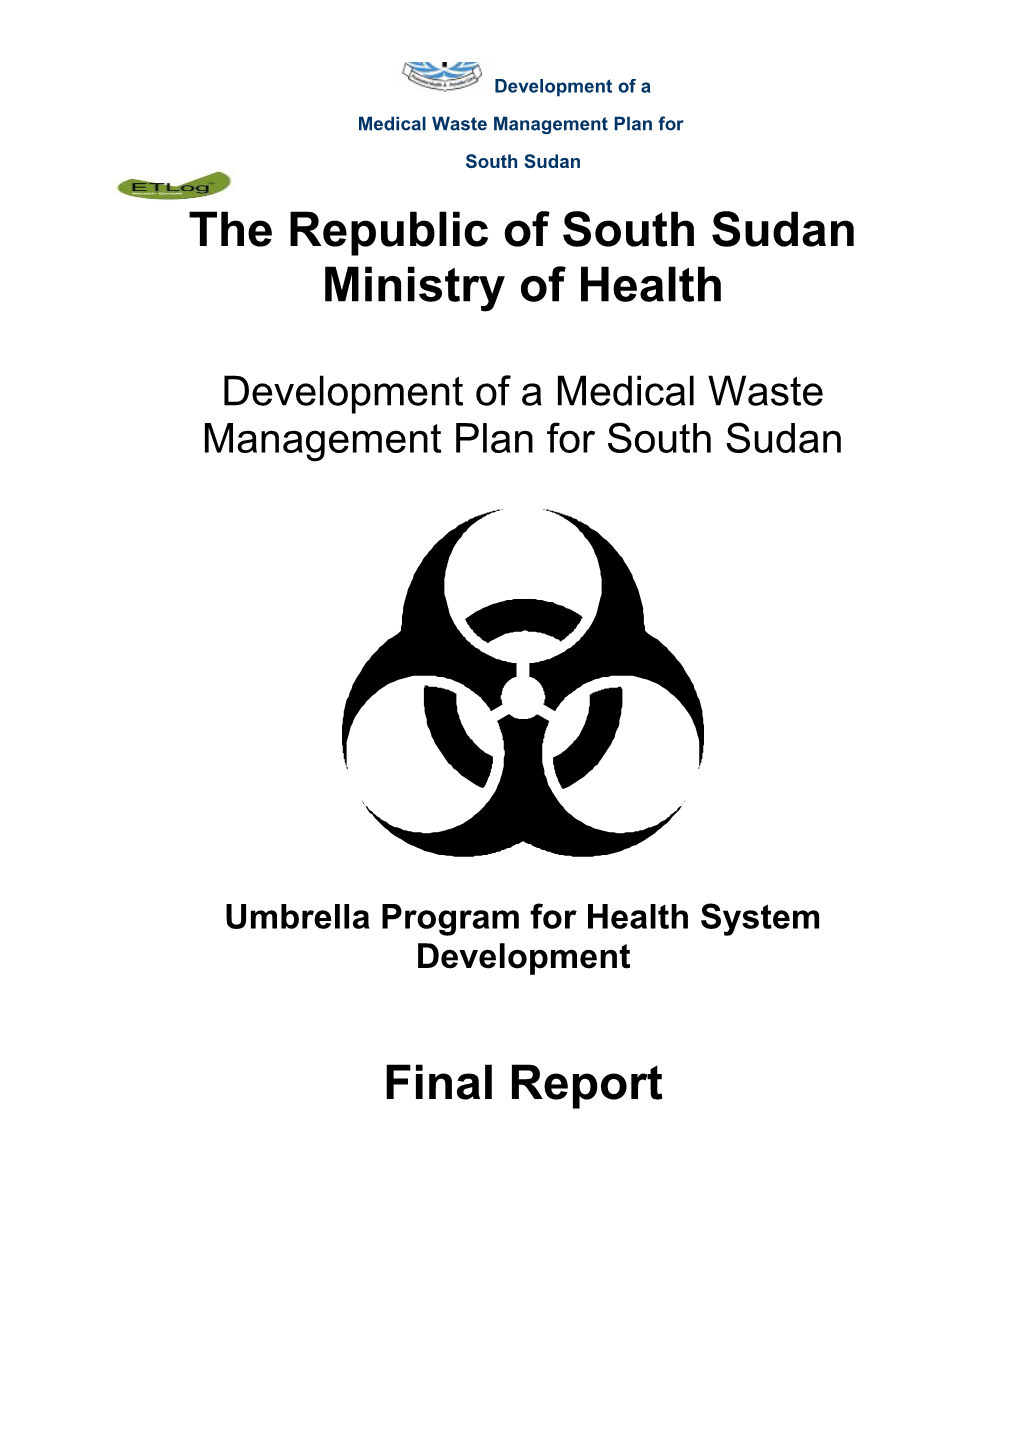 Development of a Medical Waste Management Plan for South Sudan